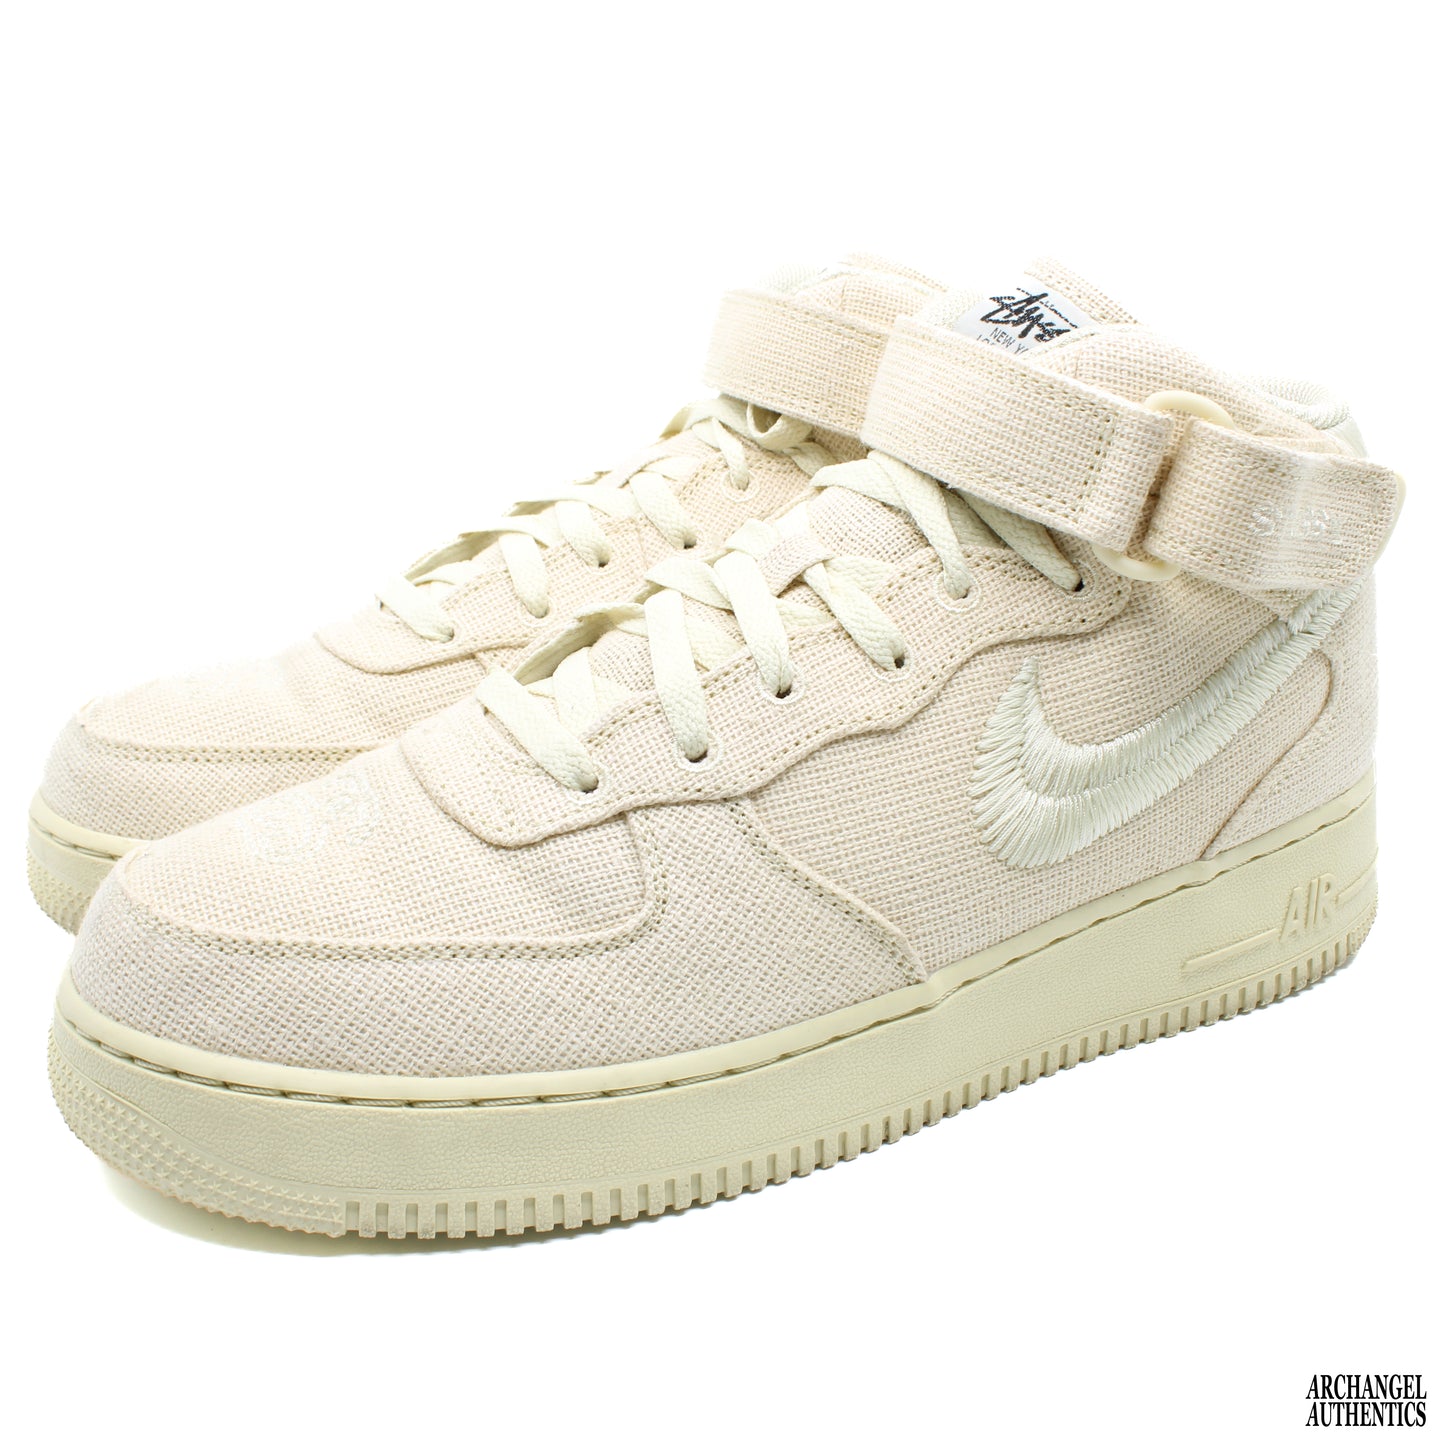 Nike Air Force 1 Mid Stussy Fossil